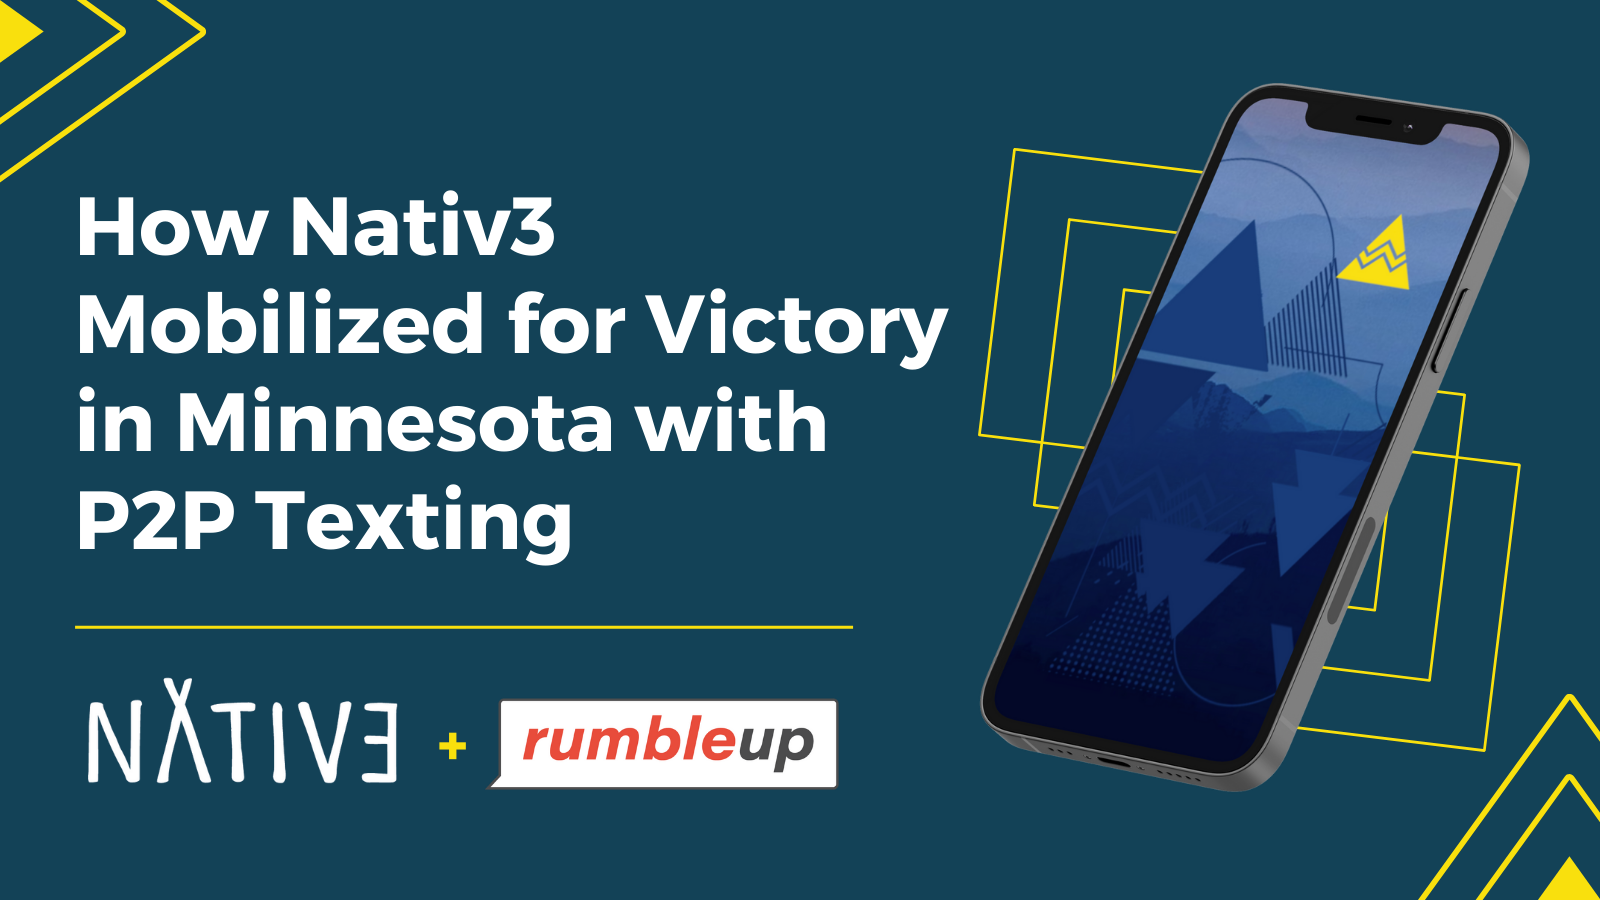 How Nativ3 Mobilized for Victory in Minnesota with P2P Texting